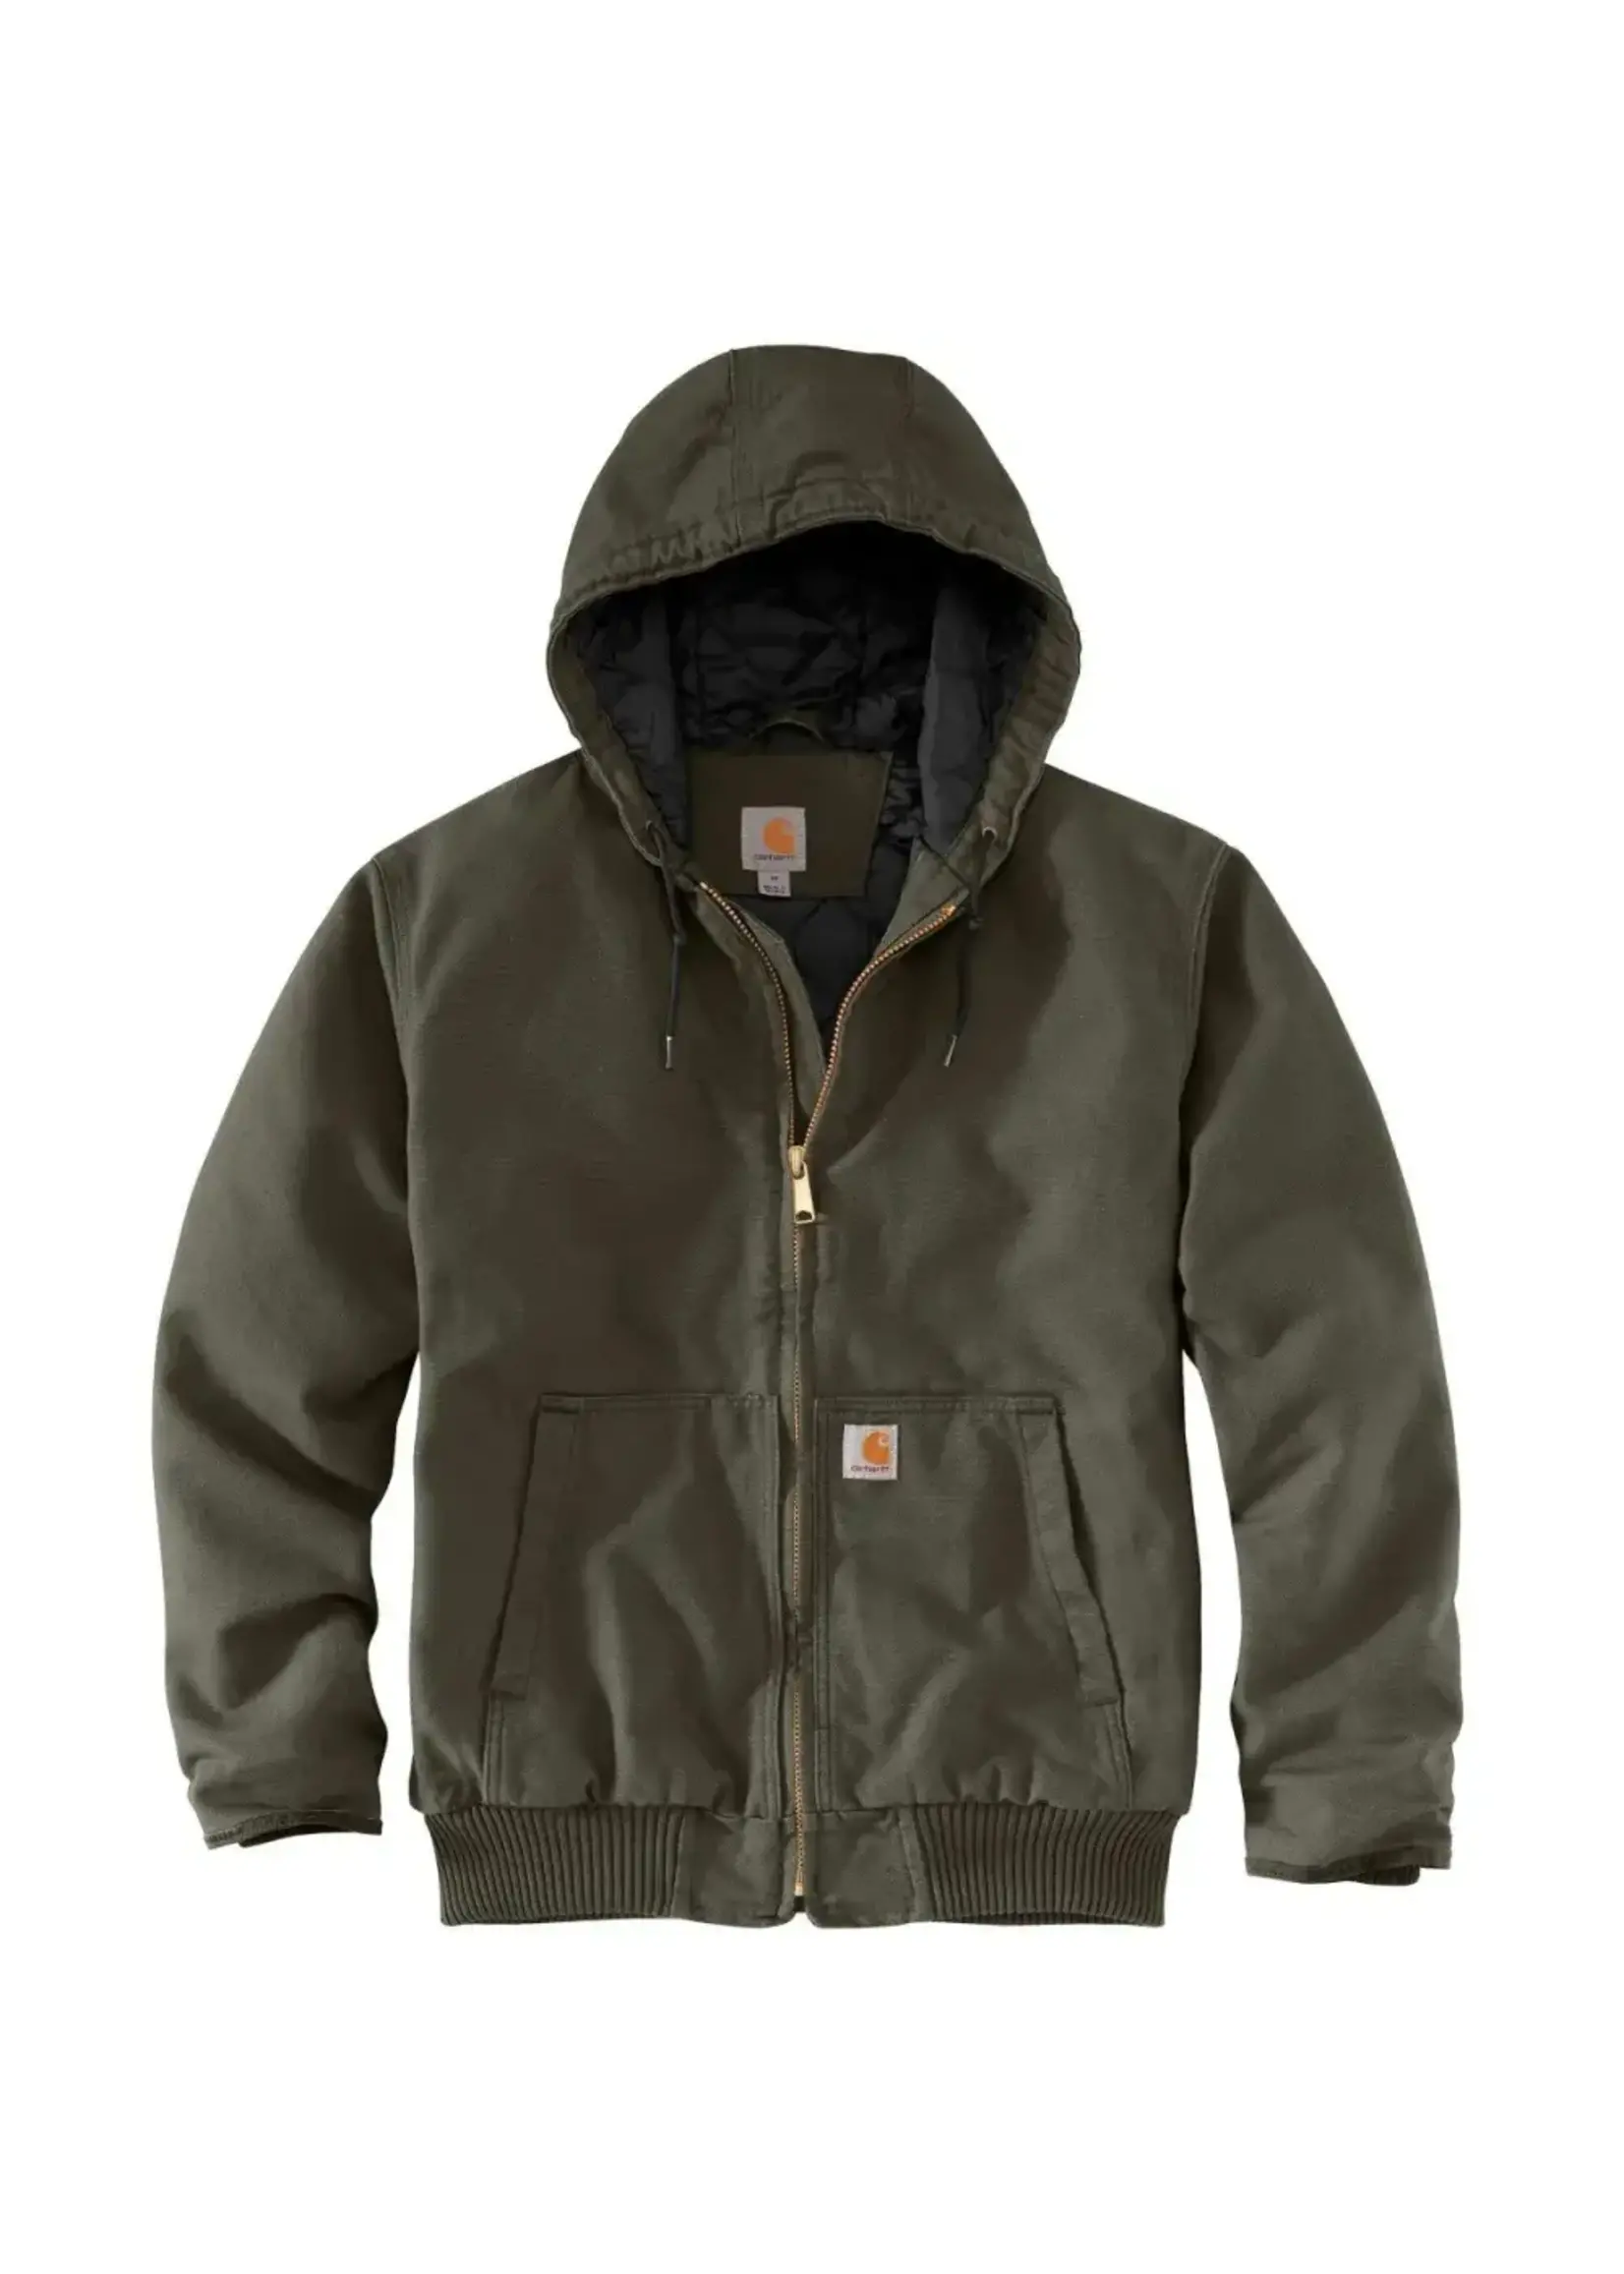 Carhartt Loose Fit Washed Duck Insulated Active Jac - 3 Warmest Rating - Big